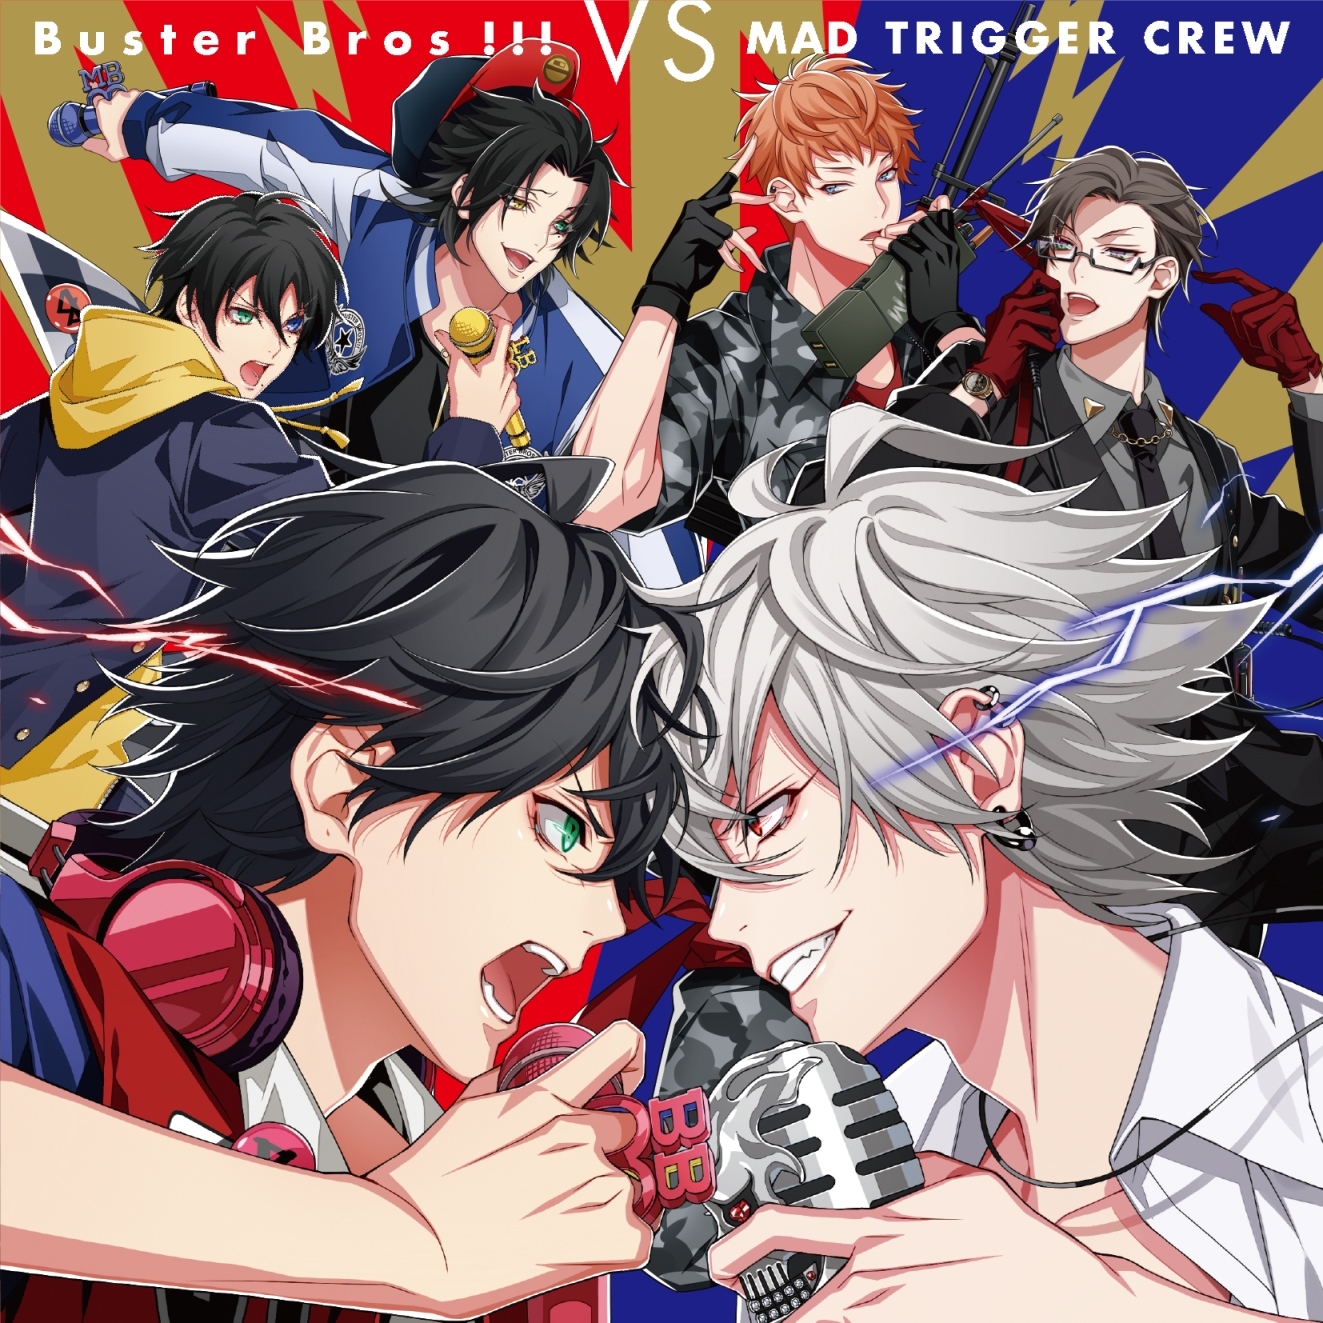 Buster Bros!!!・MAD TRIGGER CREW「Buster Bros!!! VS MAD TRIGGER CREW」 （c）King Record Co., Ltd.